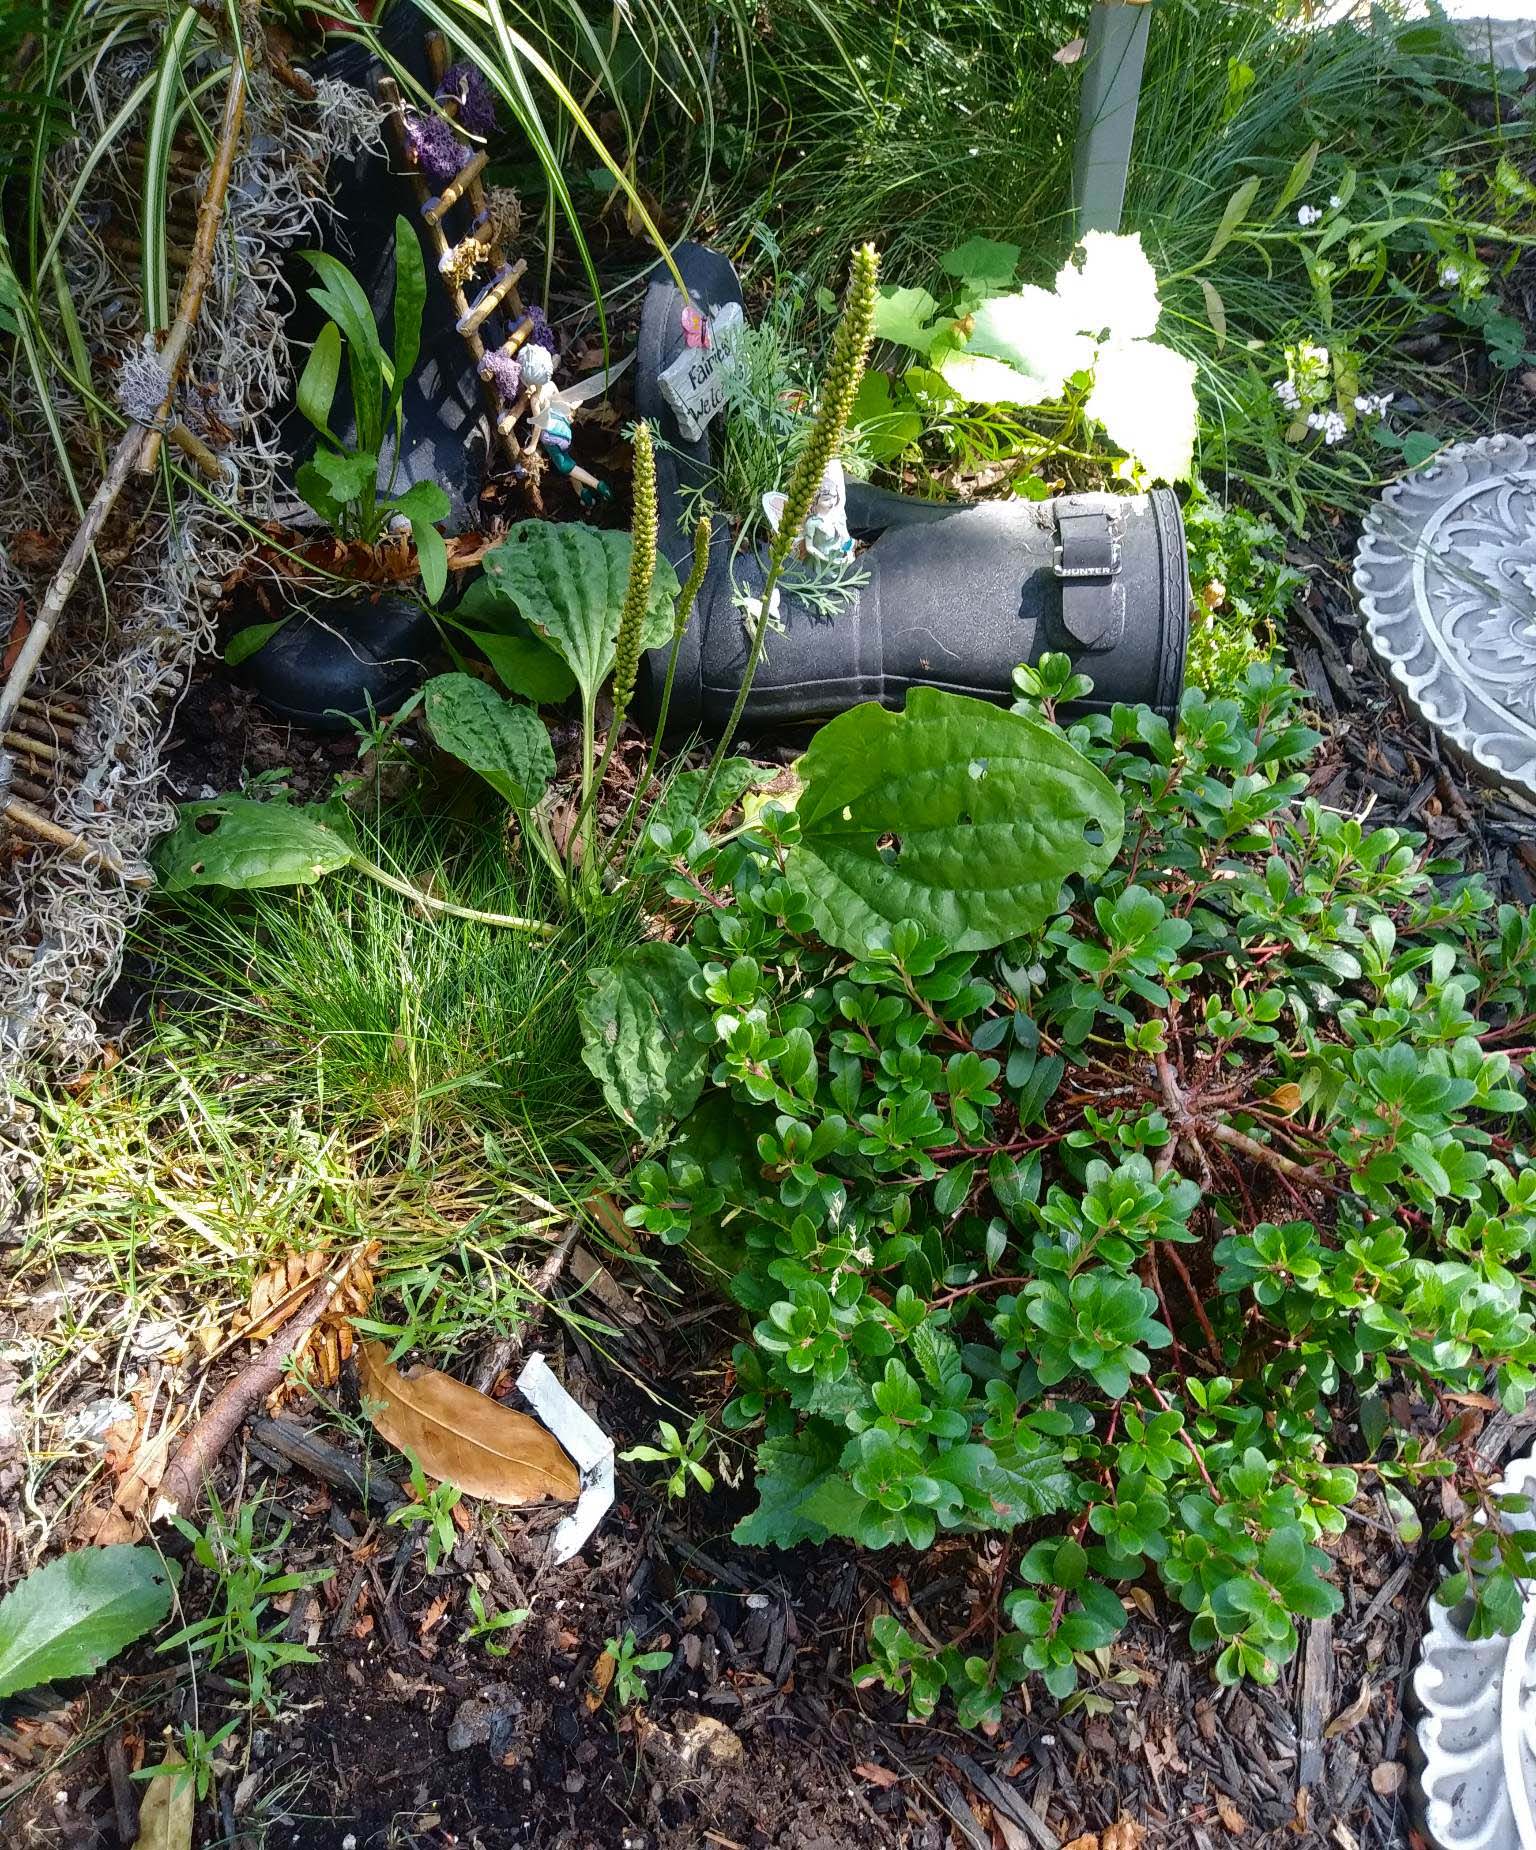 A messy garden with rubber boots